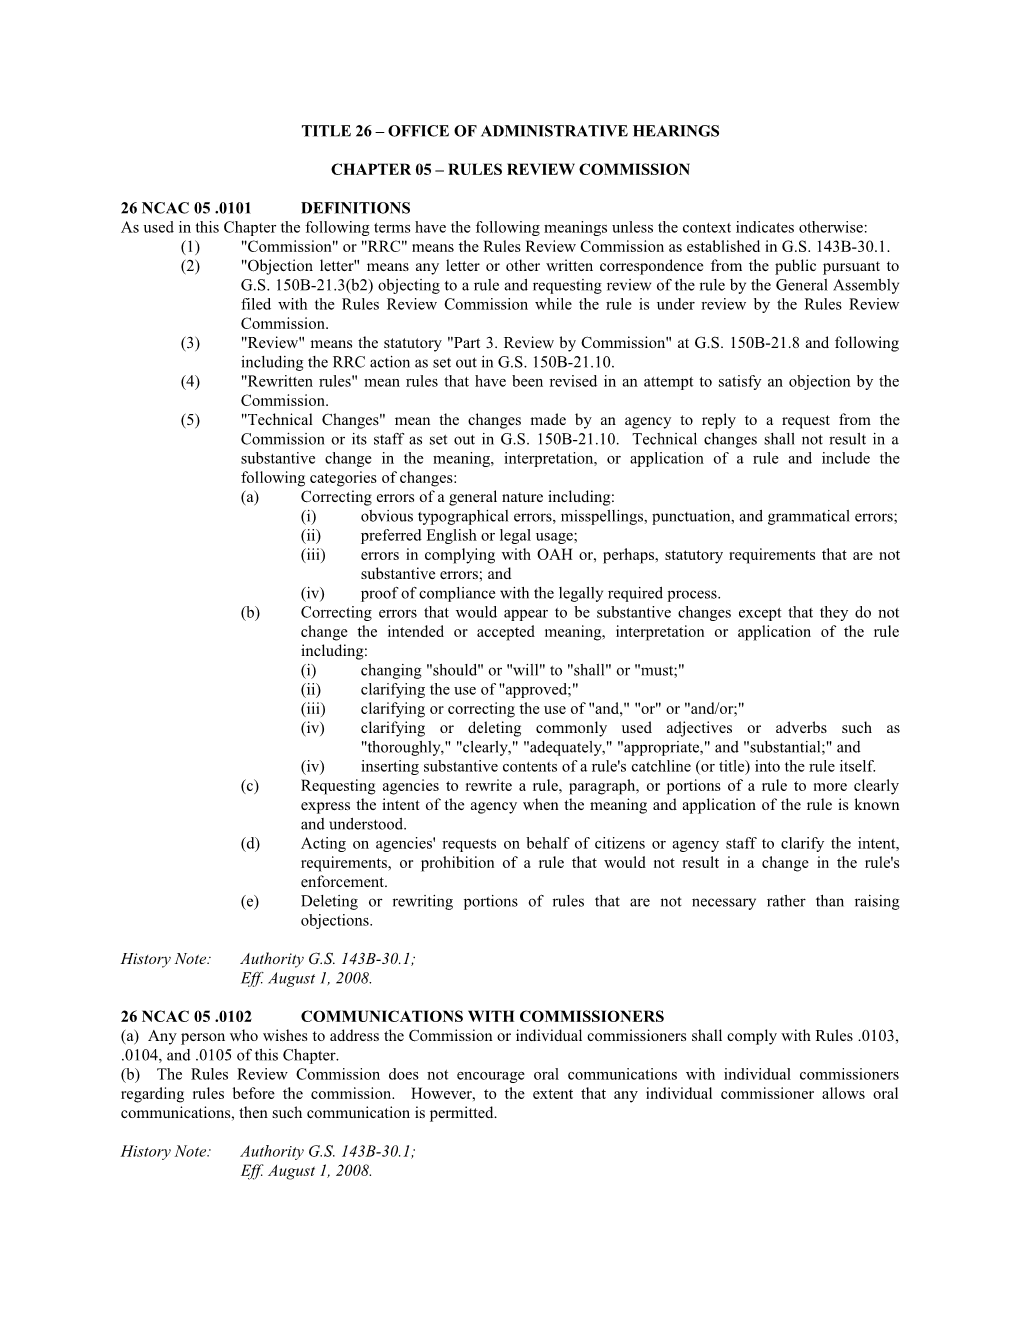 Title 26 Office of Administrative Hearings